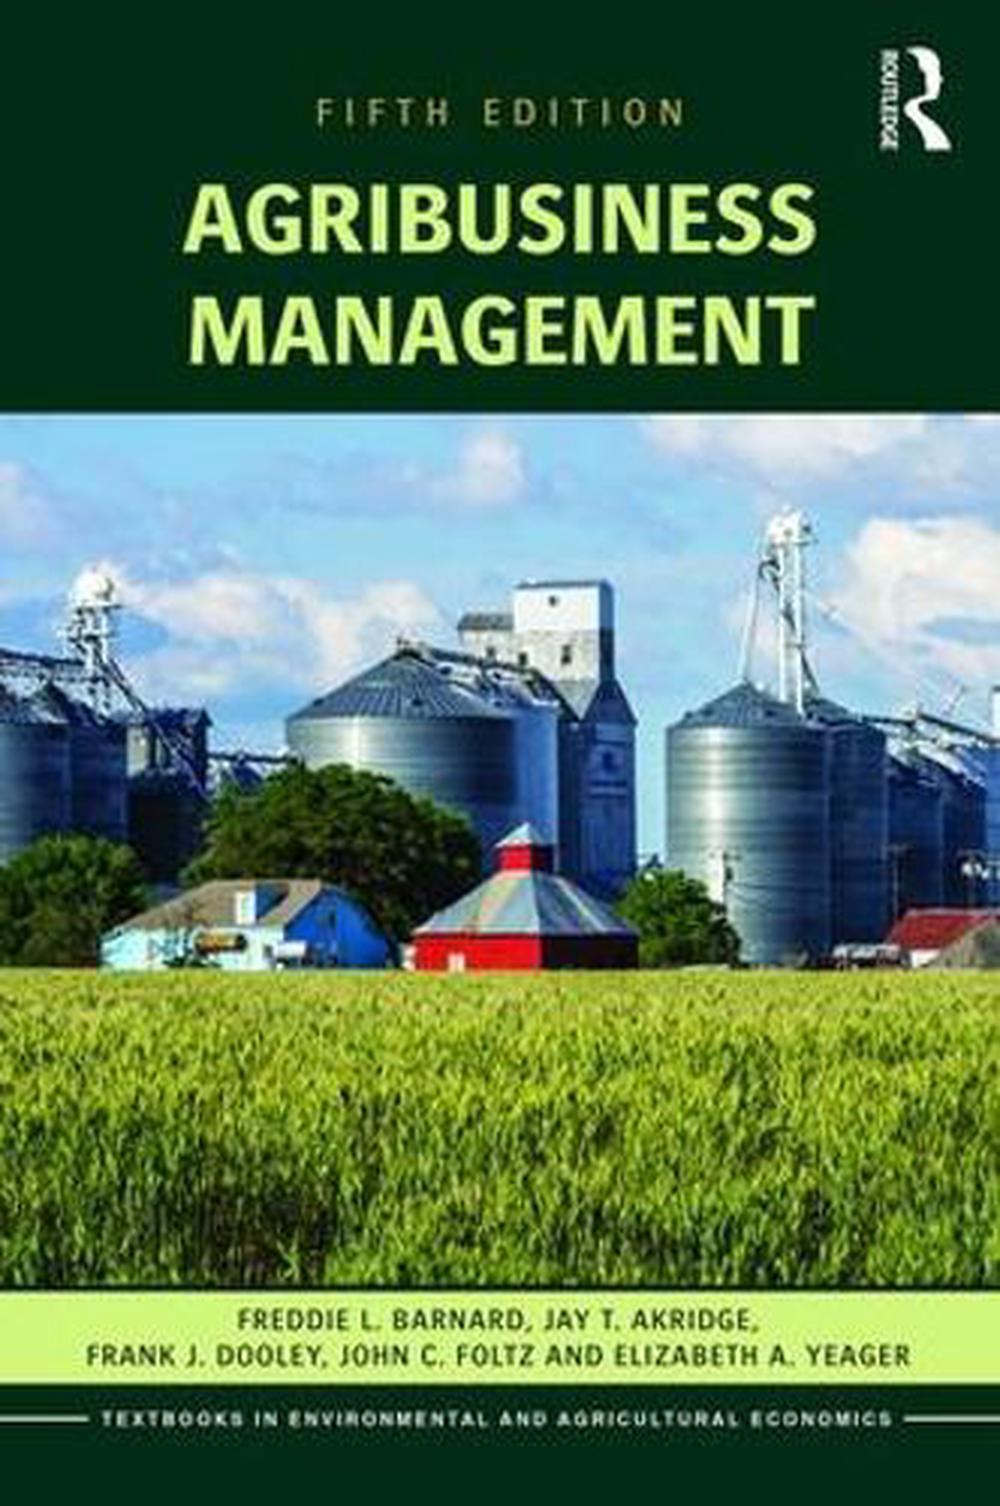 phd agribusiness management